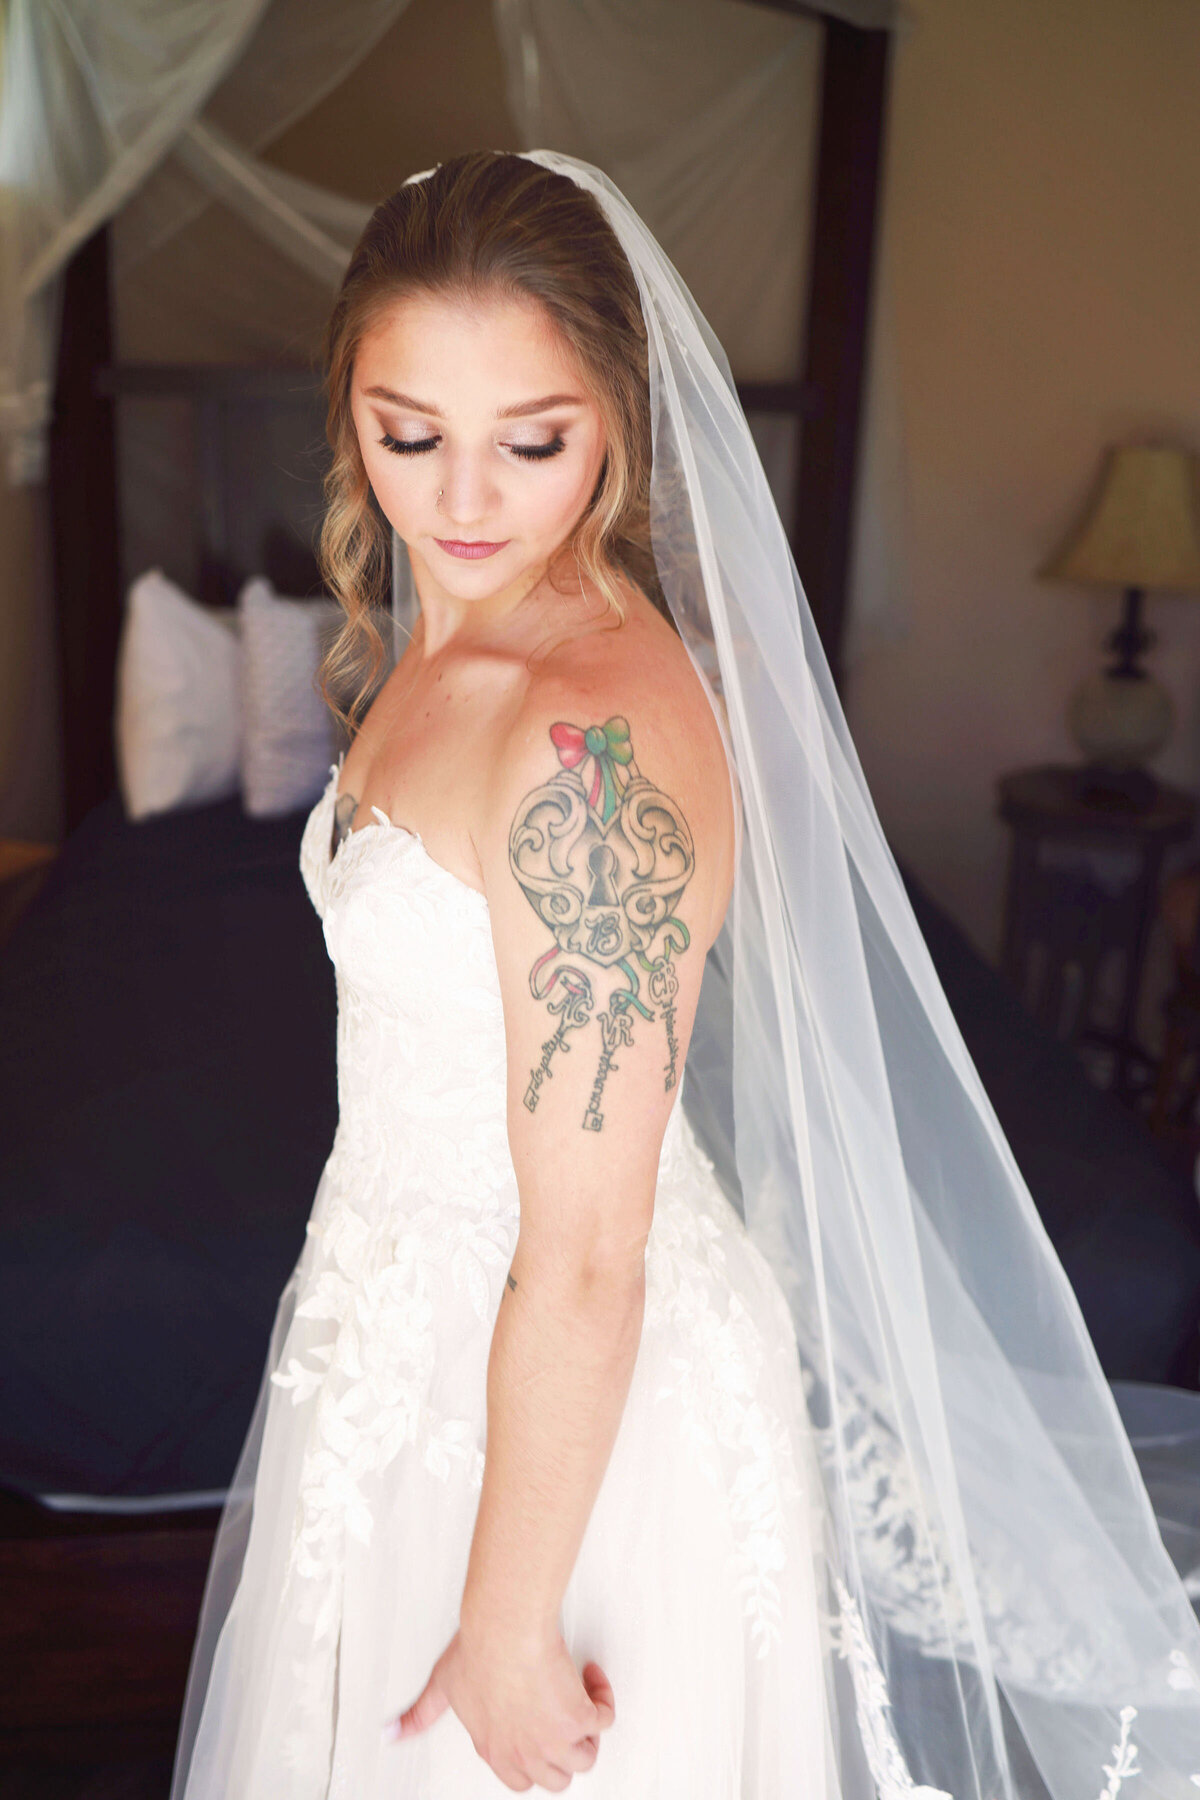 A young bride looks down across her left shoulder, highlighting her beautiful tattoo on her shoulder.